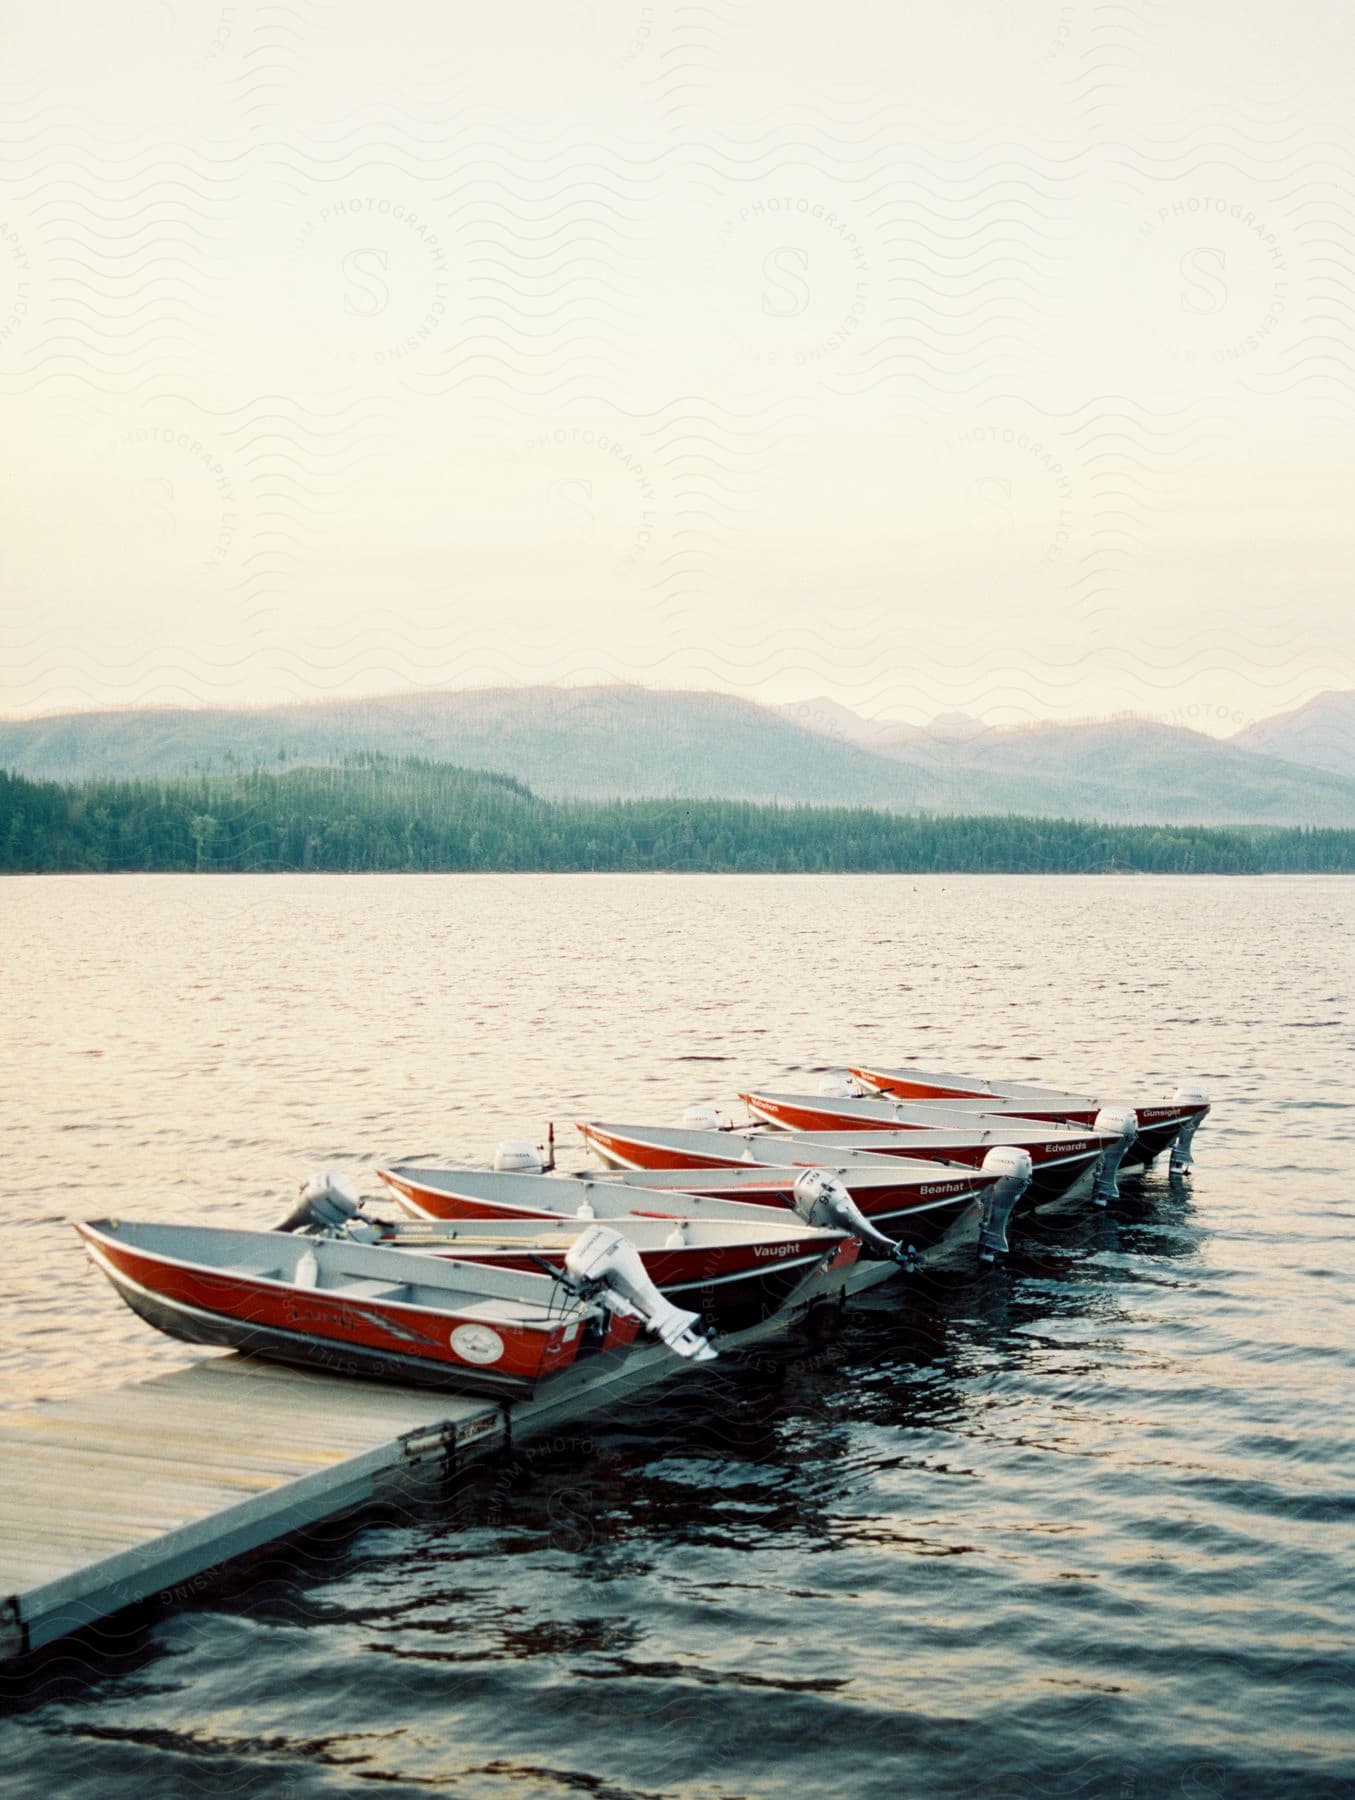 Boats parked on a narrow wooden dock on a lake